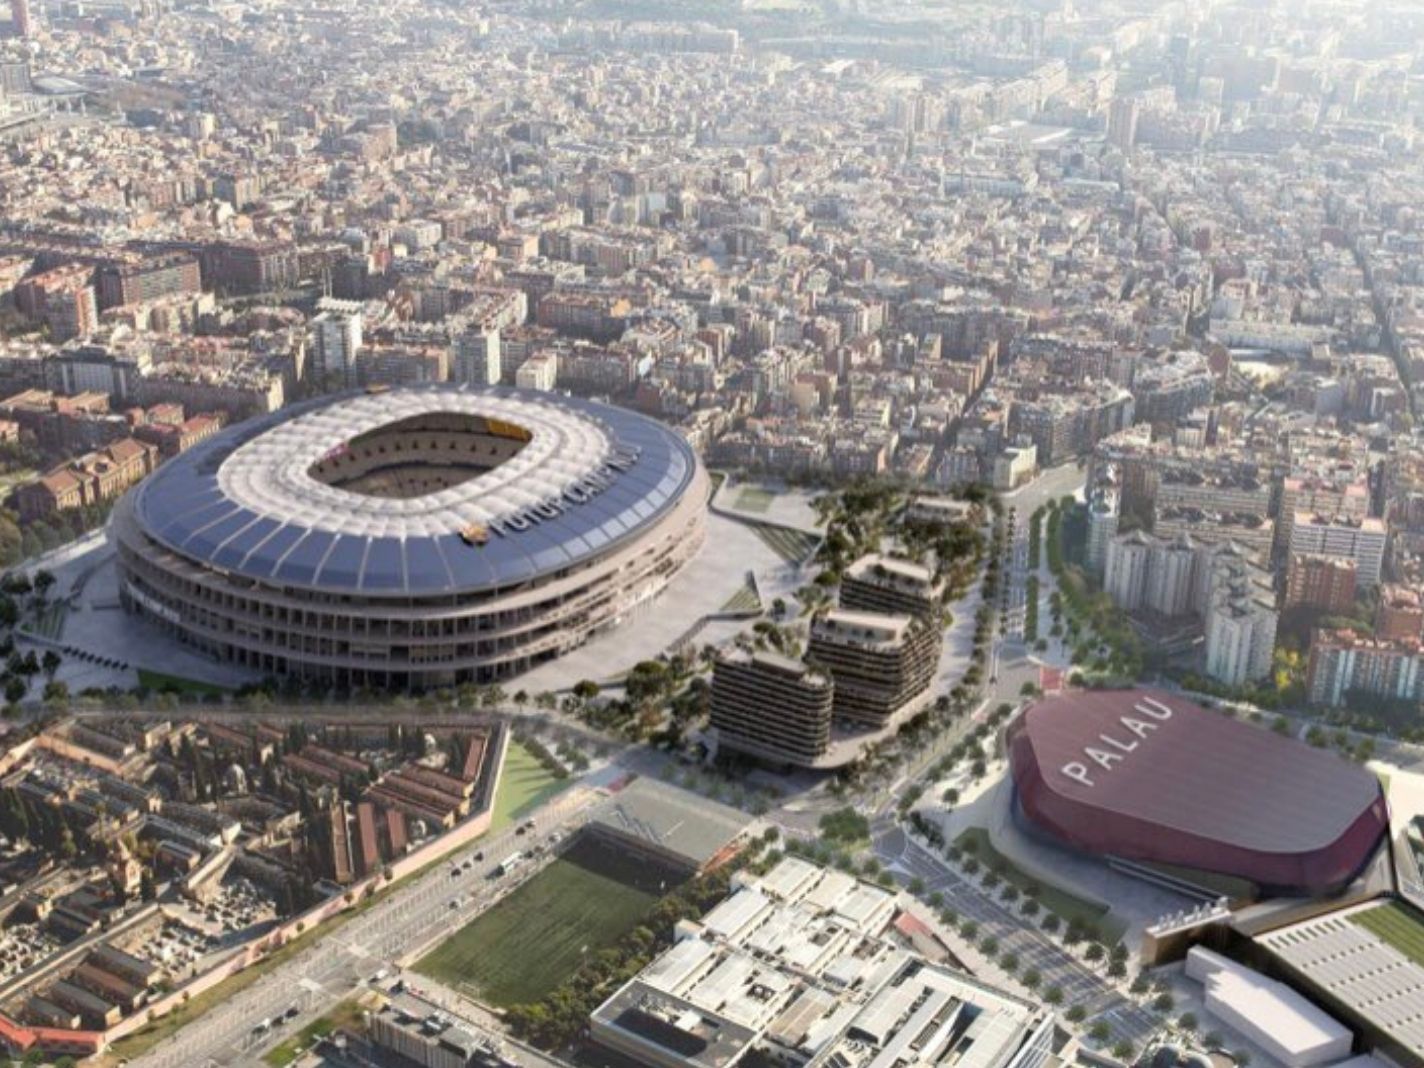 New images show a vision of what Camp Nou could look like in the future